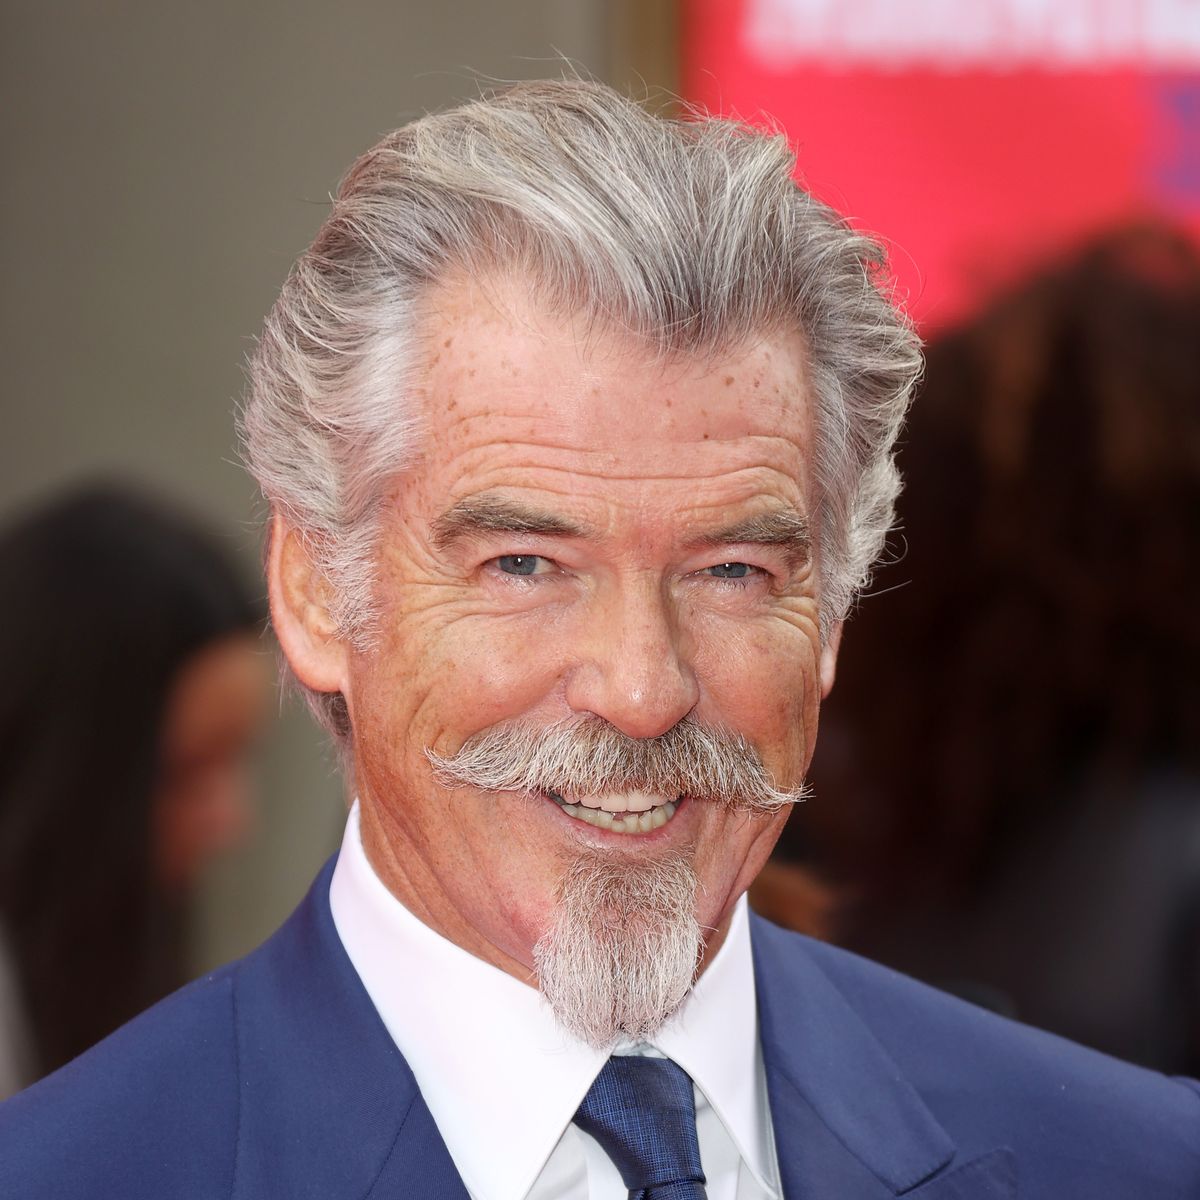 Pierce Brosnan is unrecognizable with long hair as he films scenes for new  movie in Ireland - Irish Star